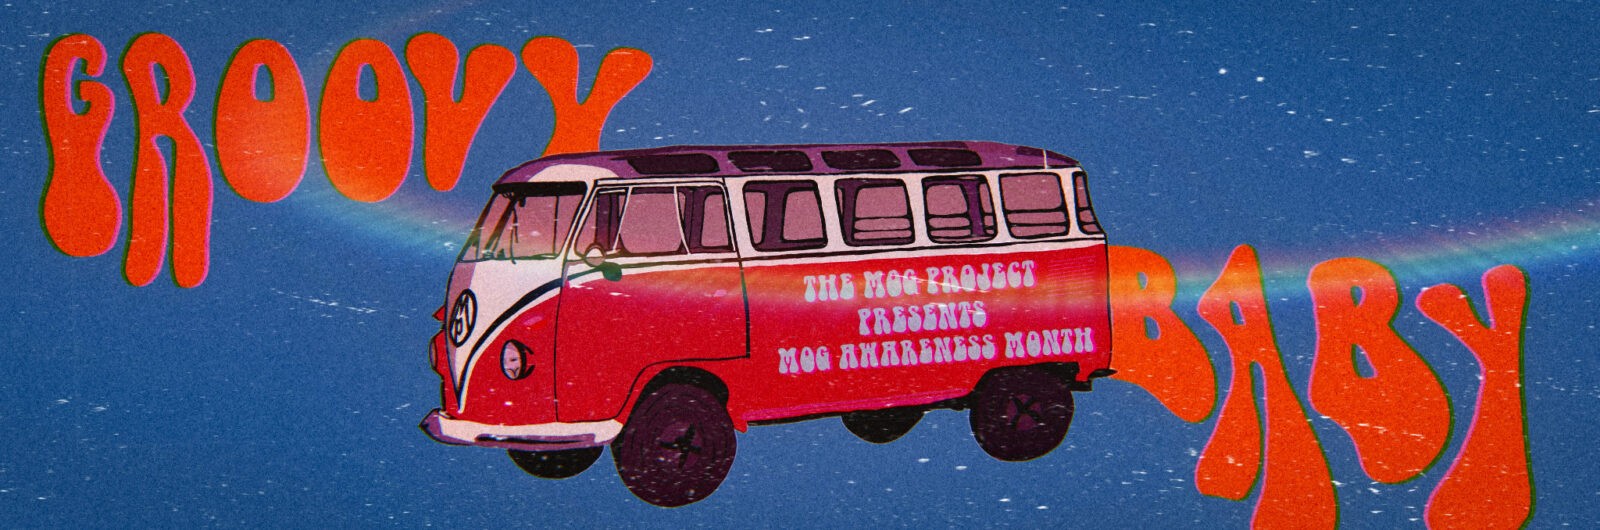 VW Bus that says The MOG Project Presents MOG Awareness Month: Groovy Baby: 60's style decor